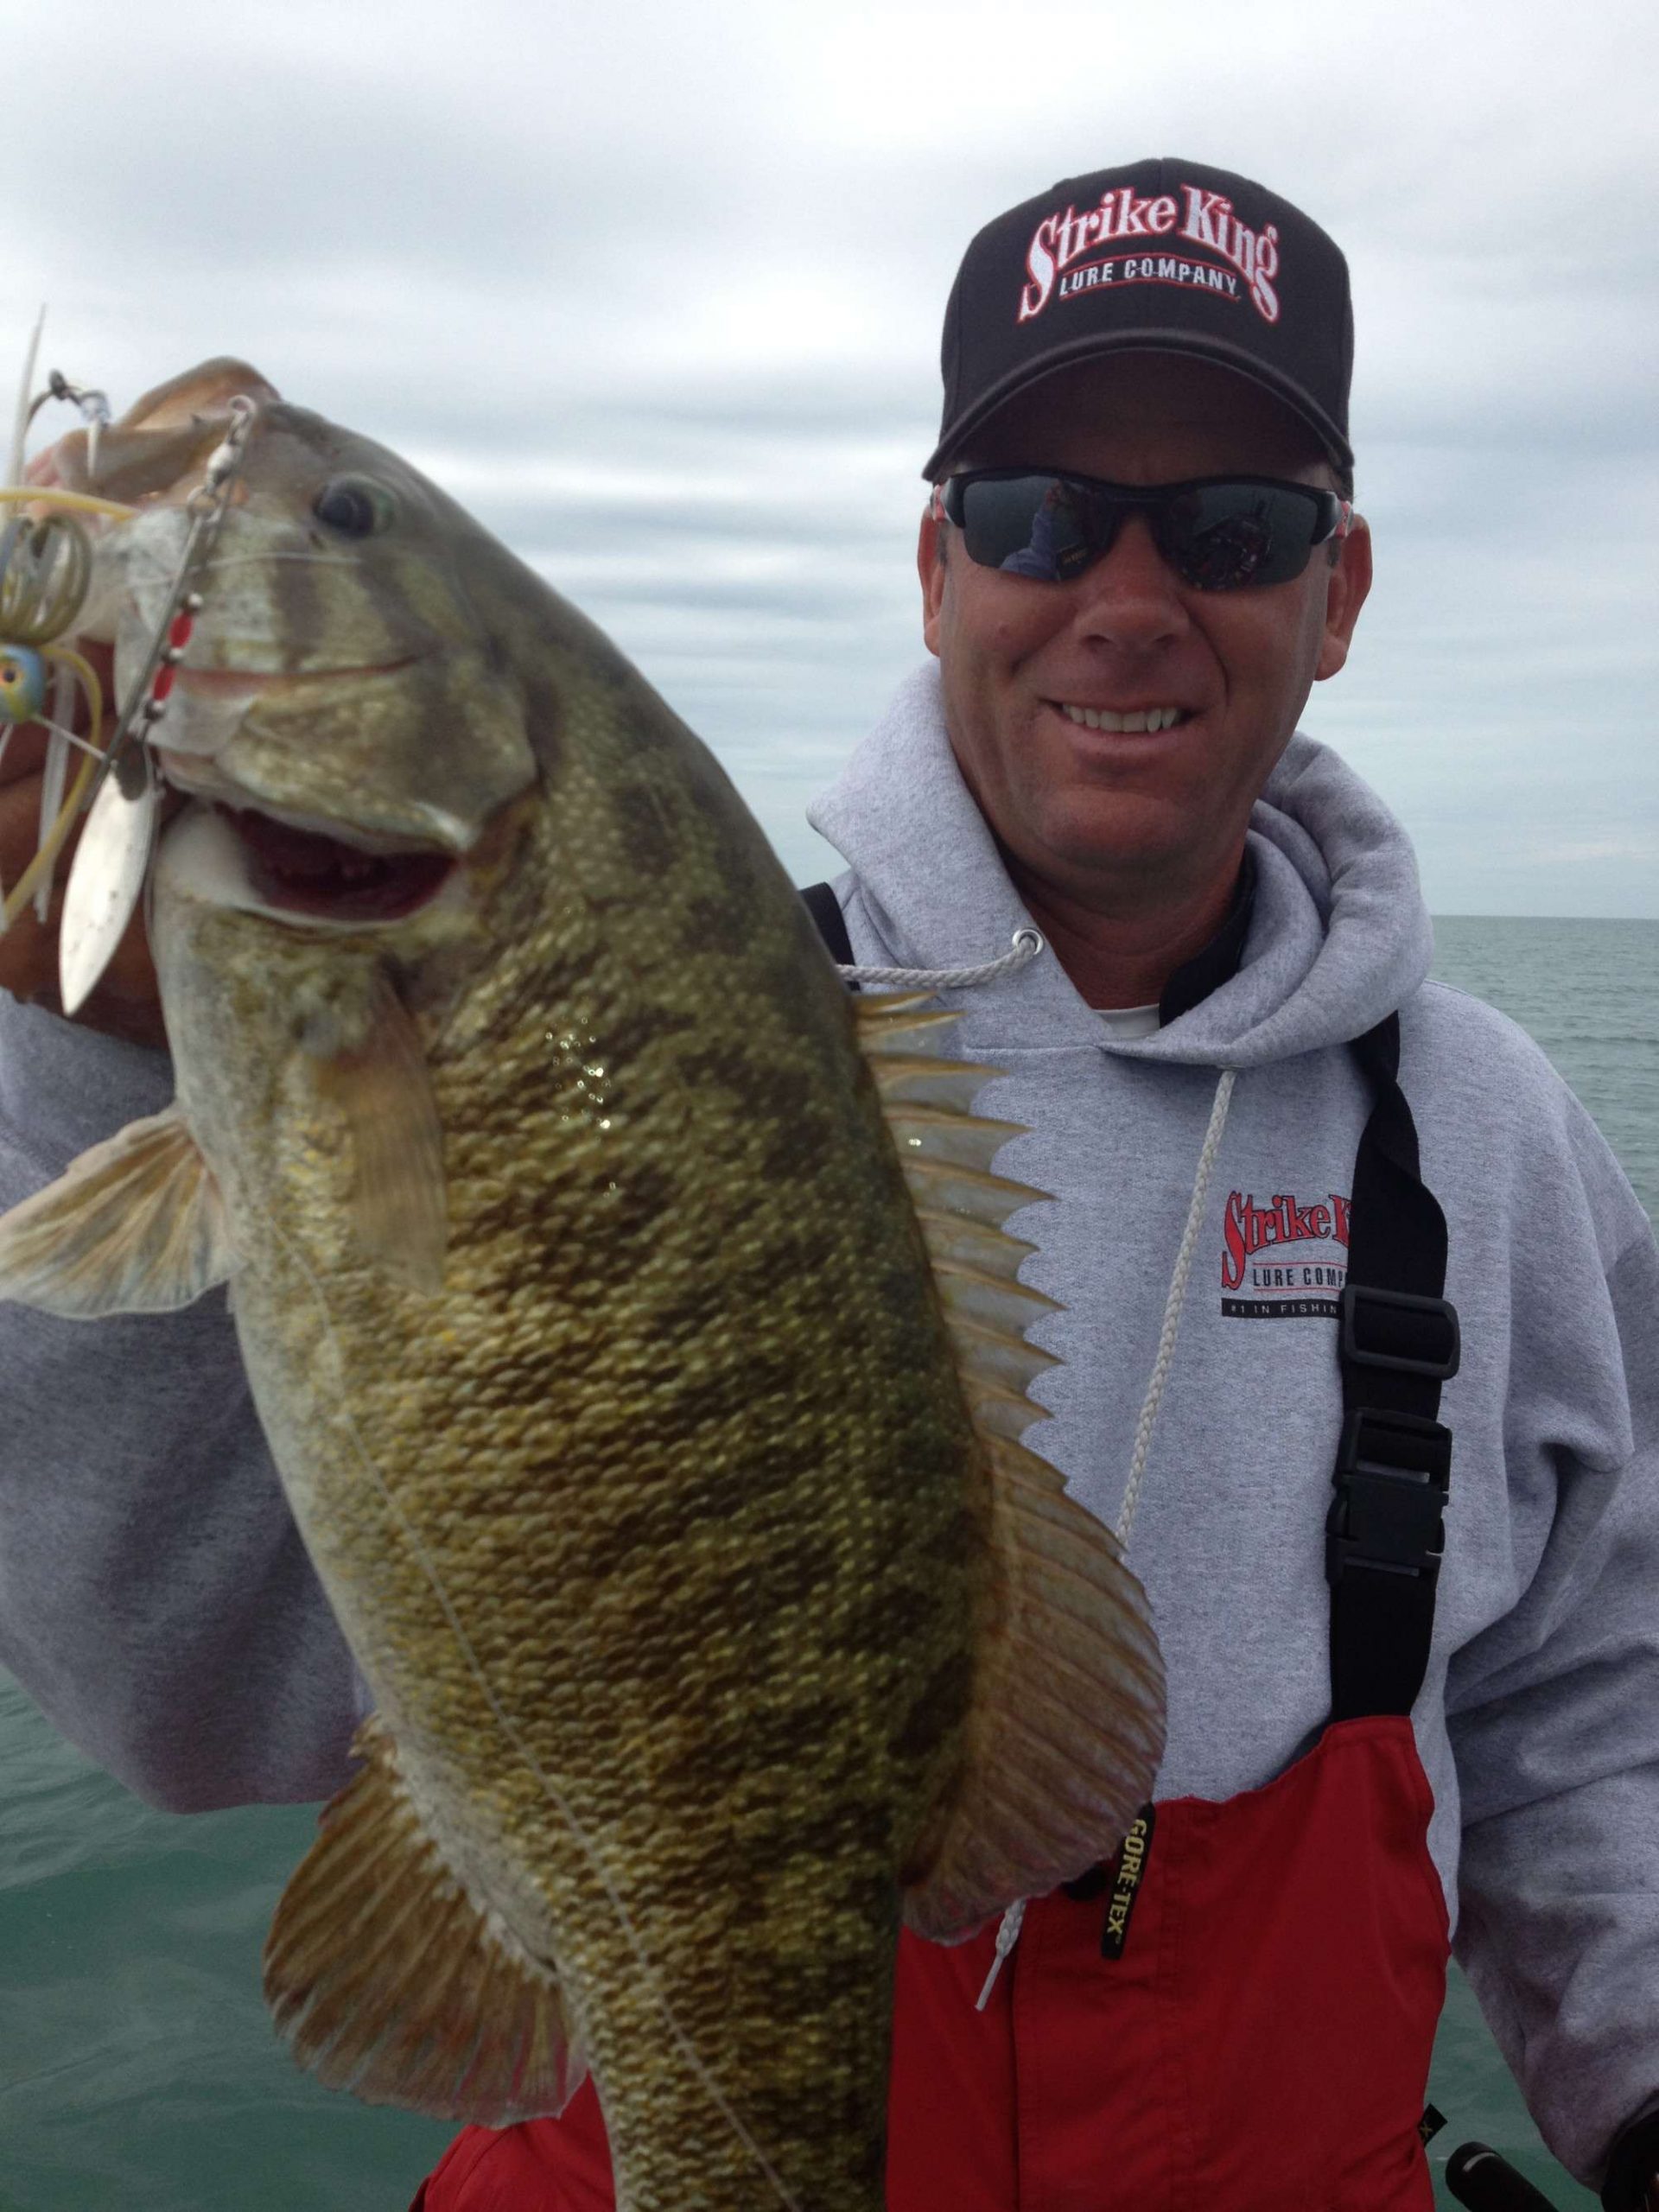 Hooked on St. Clair smallies - Bassmaster